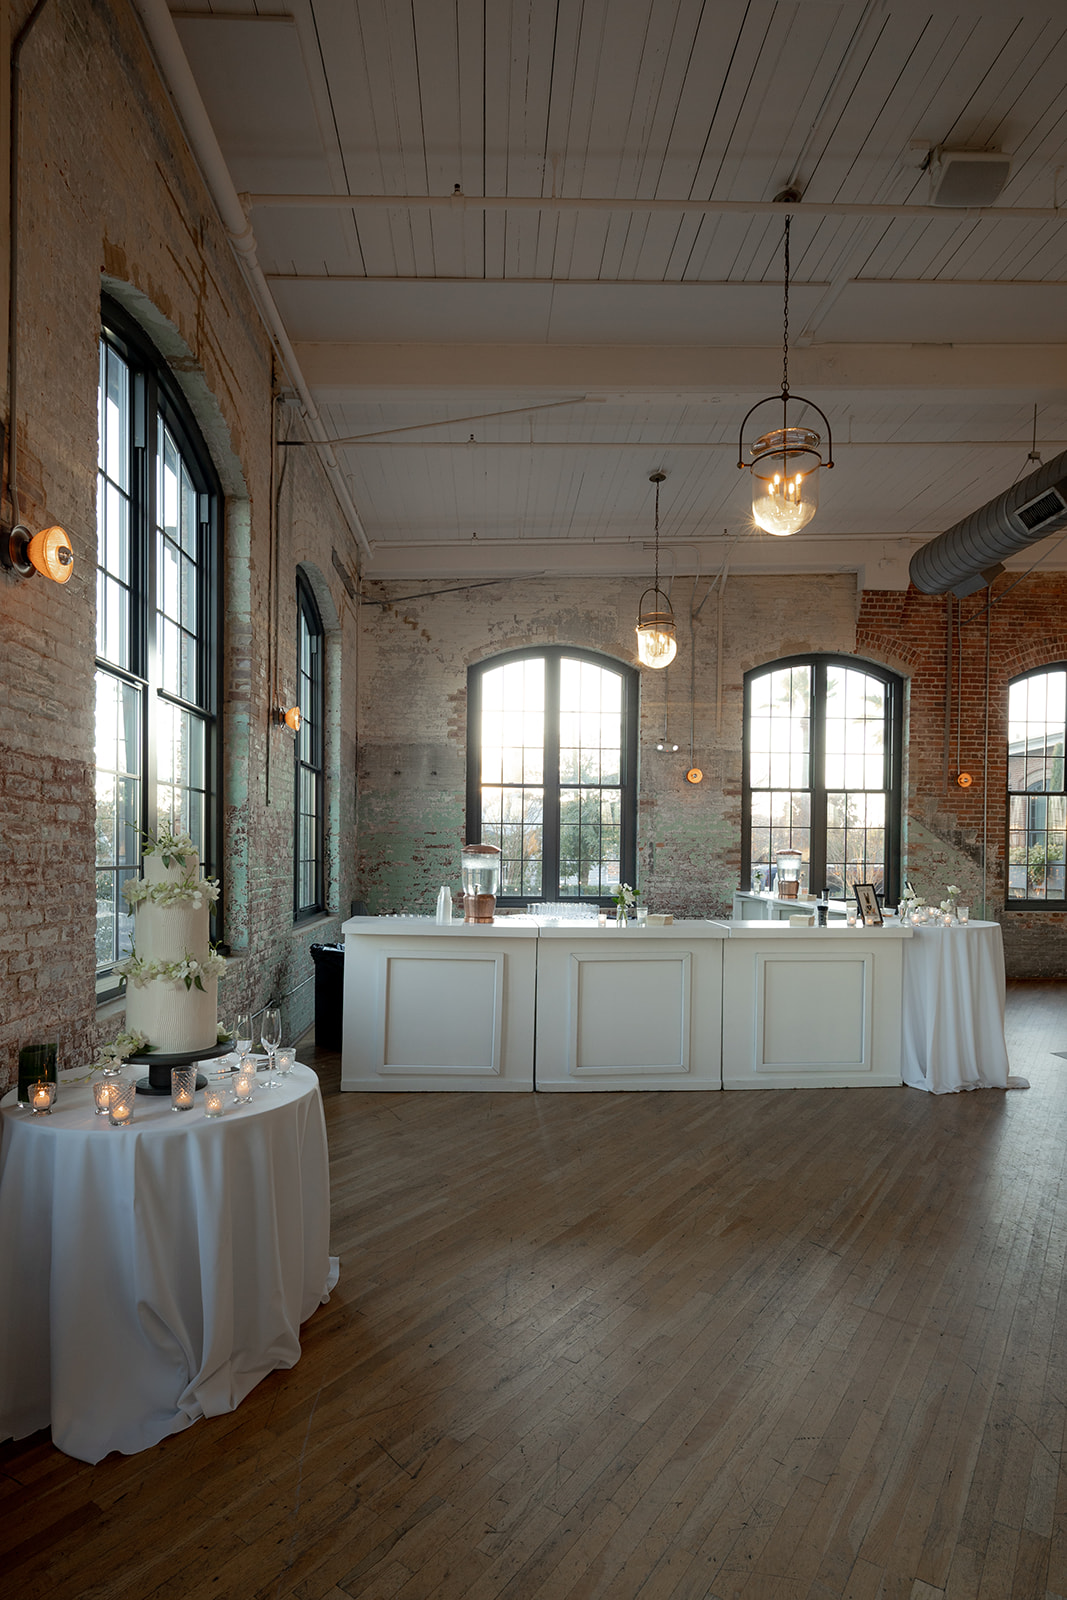 Bar and wedding cake setup at Cedar Room wedding. Brick wall and tall windows in the background